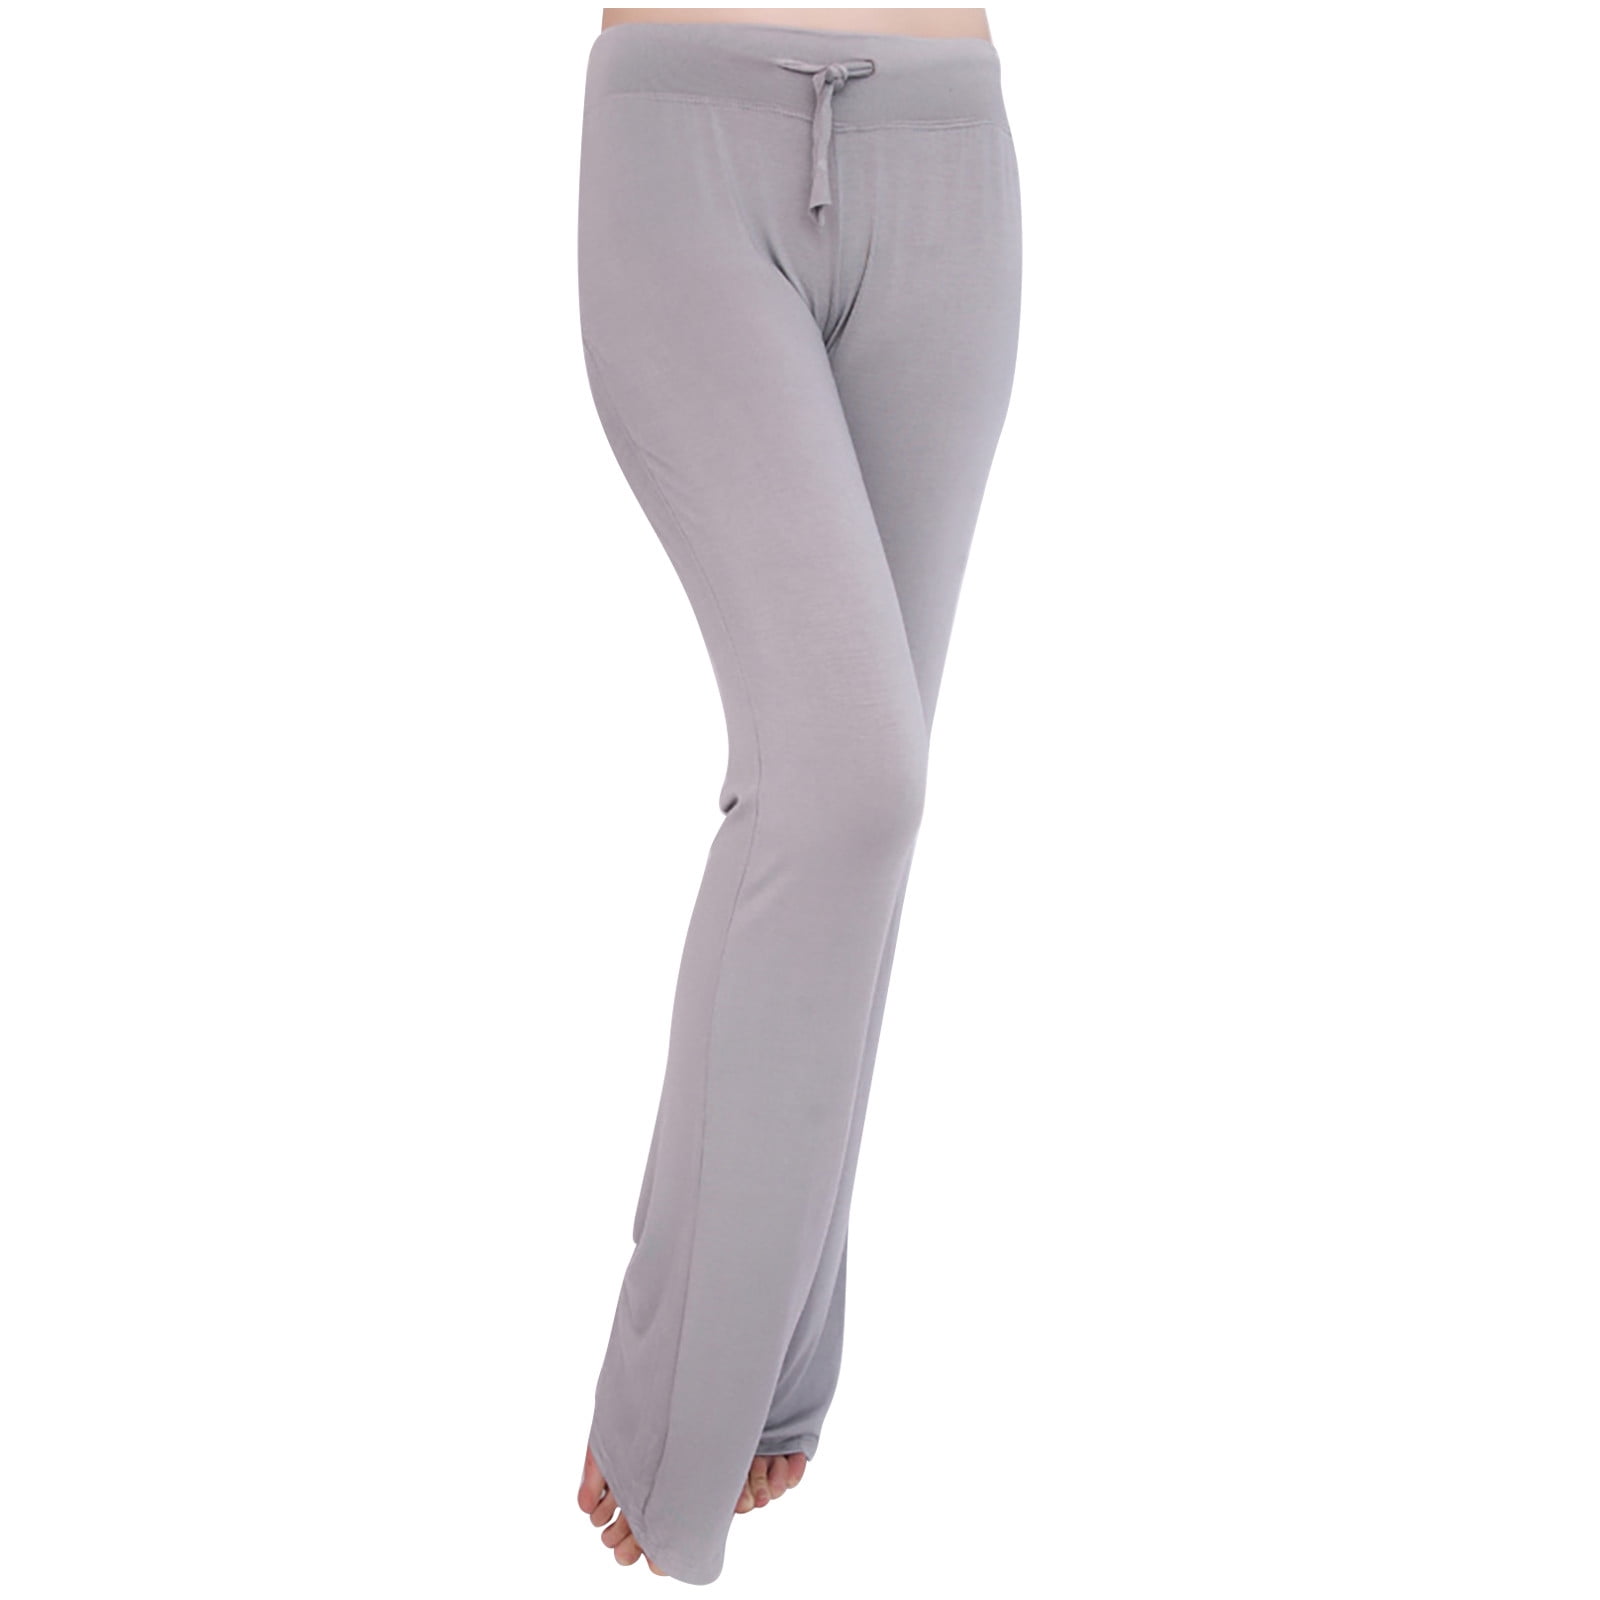 Dark Gray Yoga Pants For Women - Mid Waist, Drawstring, Patched